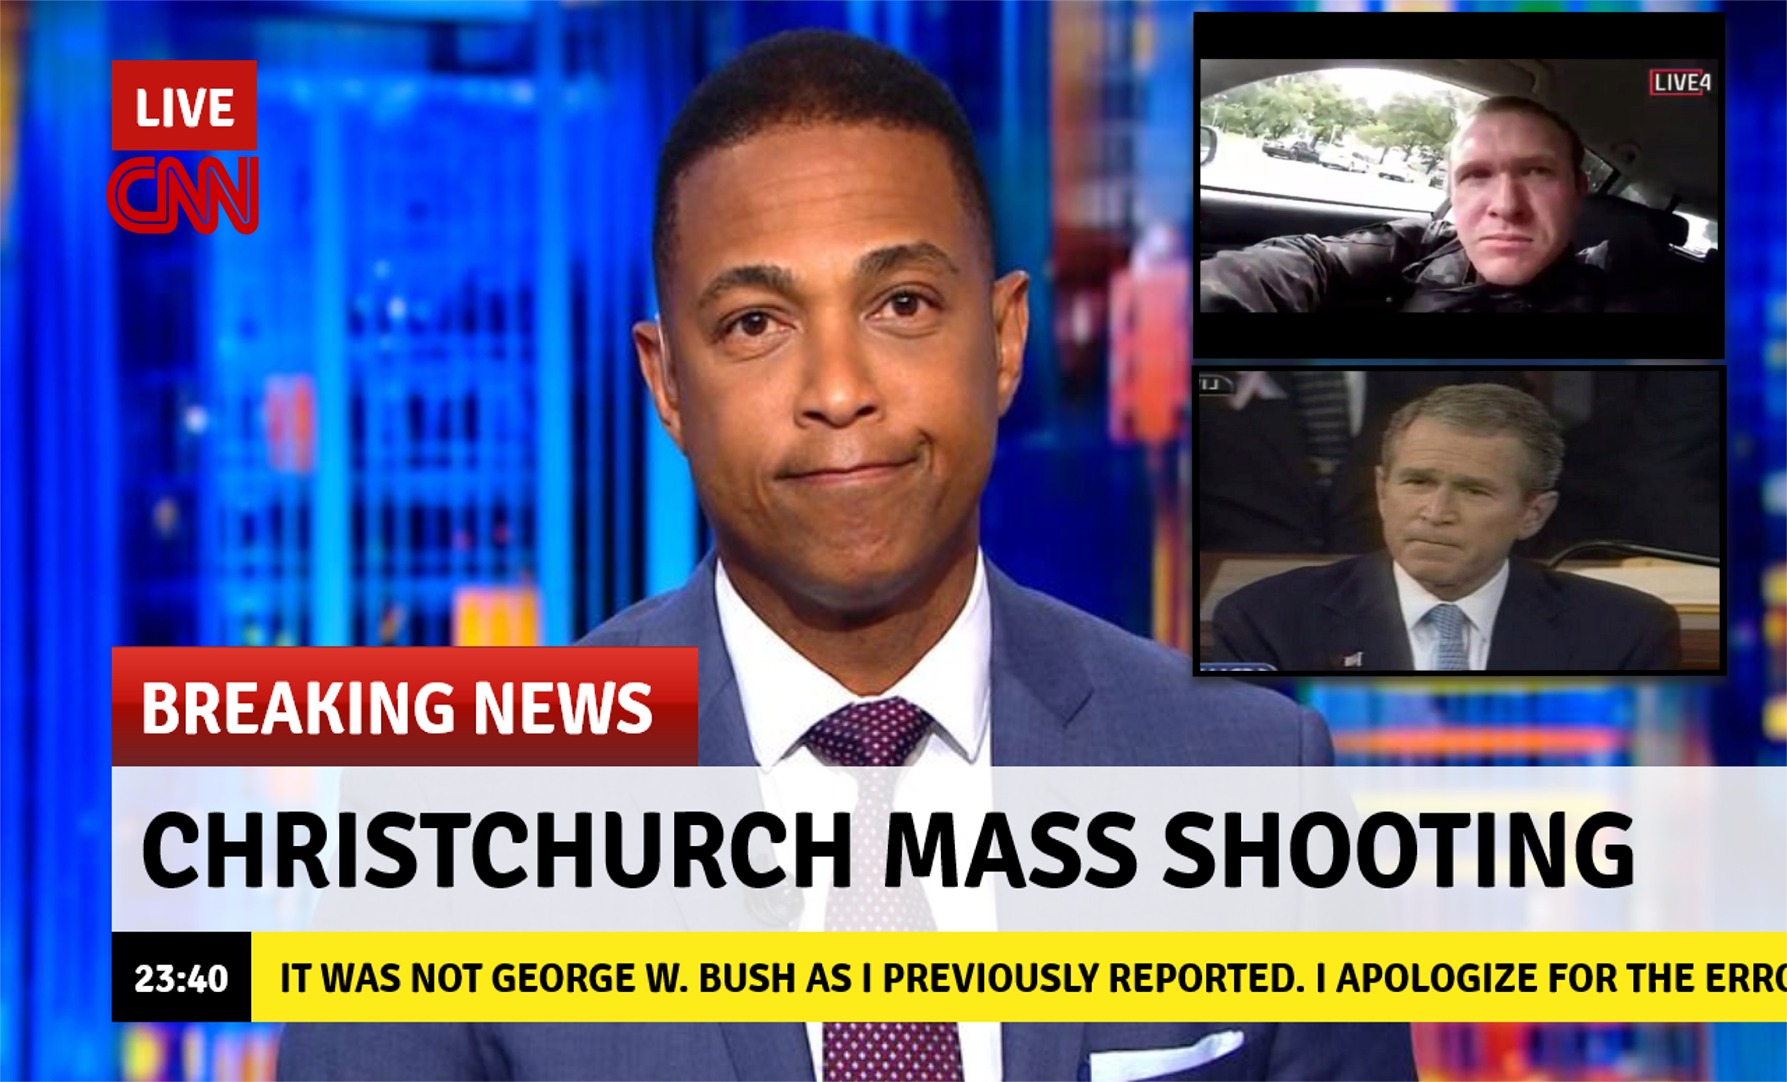 news - LIVE4 Live On Breaking News Christchurch Mass Shooting It Was Not George W. Bush As I Previously Reported. I Apologize For The Err